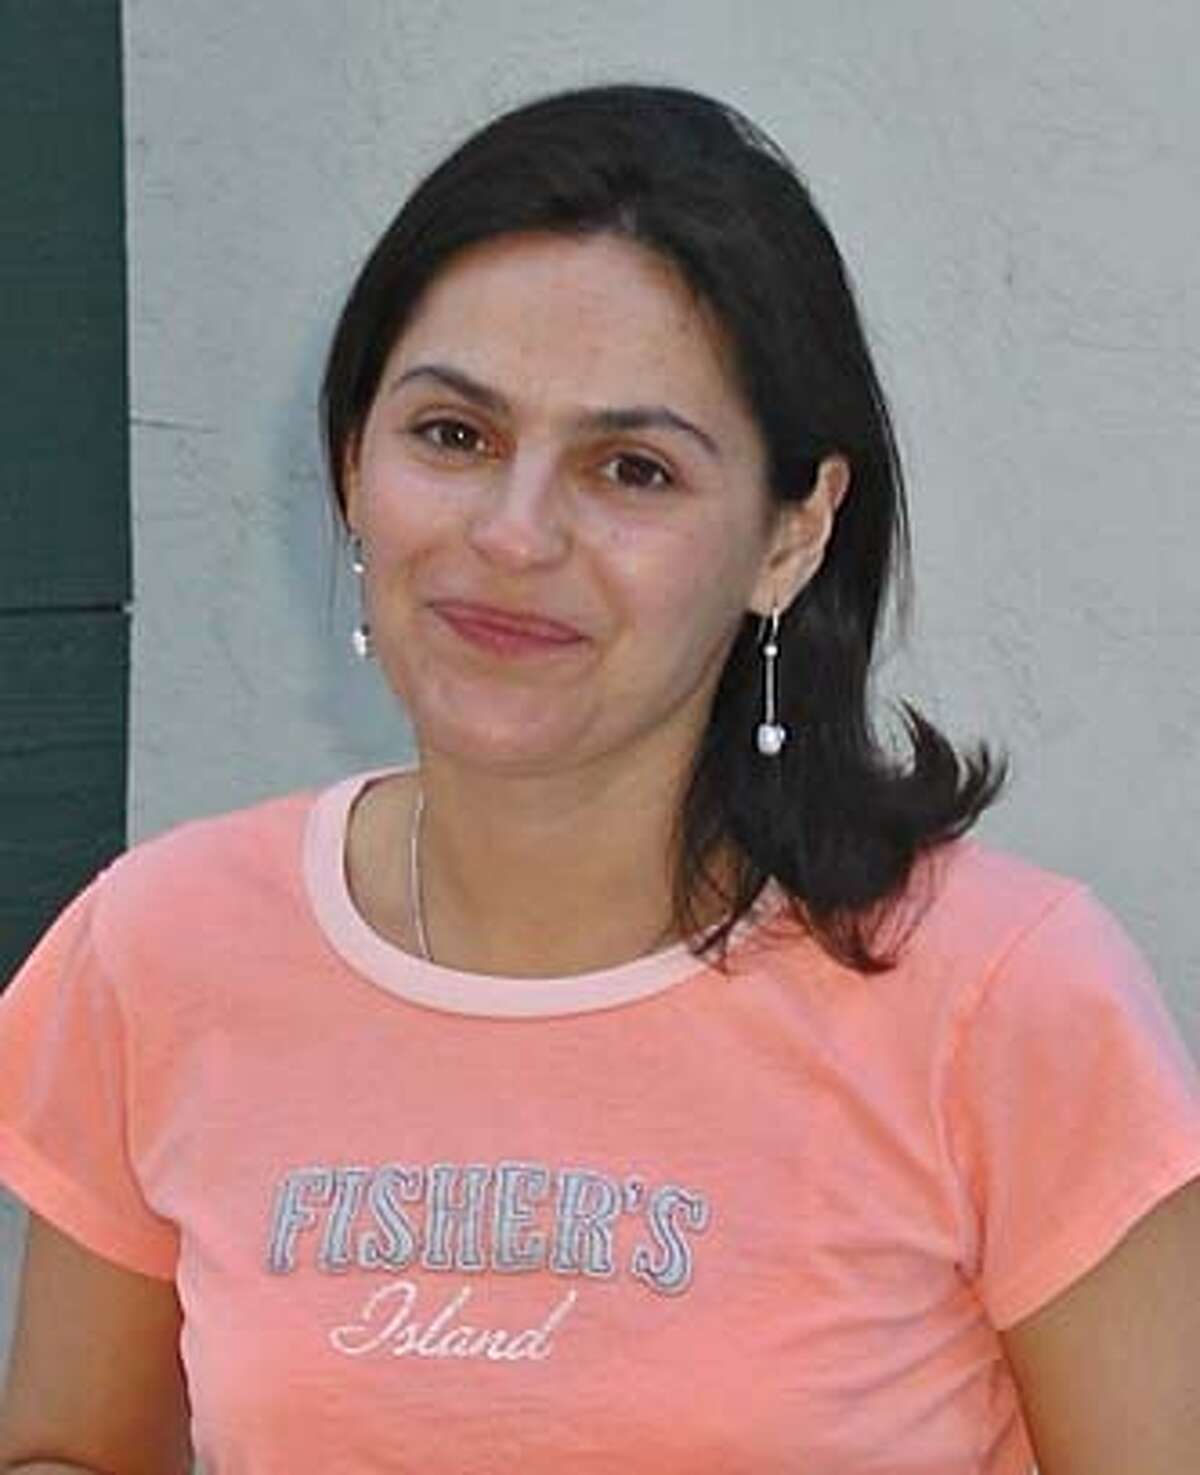 Nina Reiser is an Oakland resident and mother of two young kids. She is 5'5", 114 pounds with black hair and brown eyes. She was last seen Sunday September 3rd dropping off her two children at her ex-husband's home in the Montclair district of Oakland. Reiser was driving a tan color 2001 Honda Odyssey, license plate 4UBB491. The car was recovered by the police on Saturday, September 9th but Nina is still missing. If you have any information please call Oakland Police at 510-777-3333 or Anthony Zografos at 510-585-7814. Date of this posting: 9/10/2006